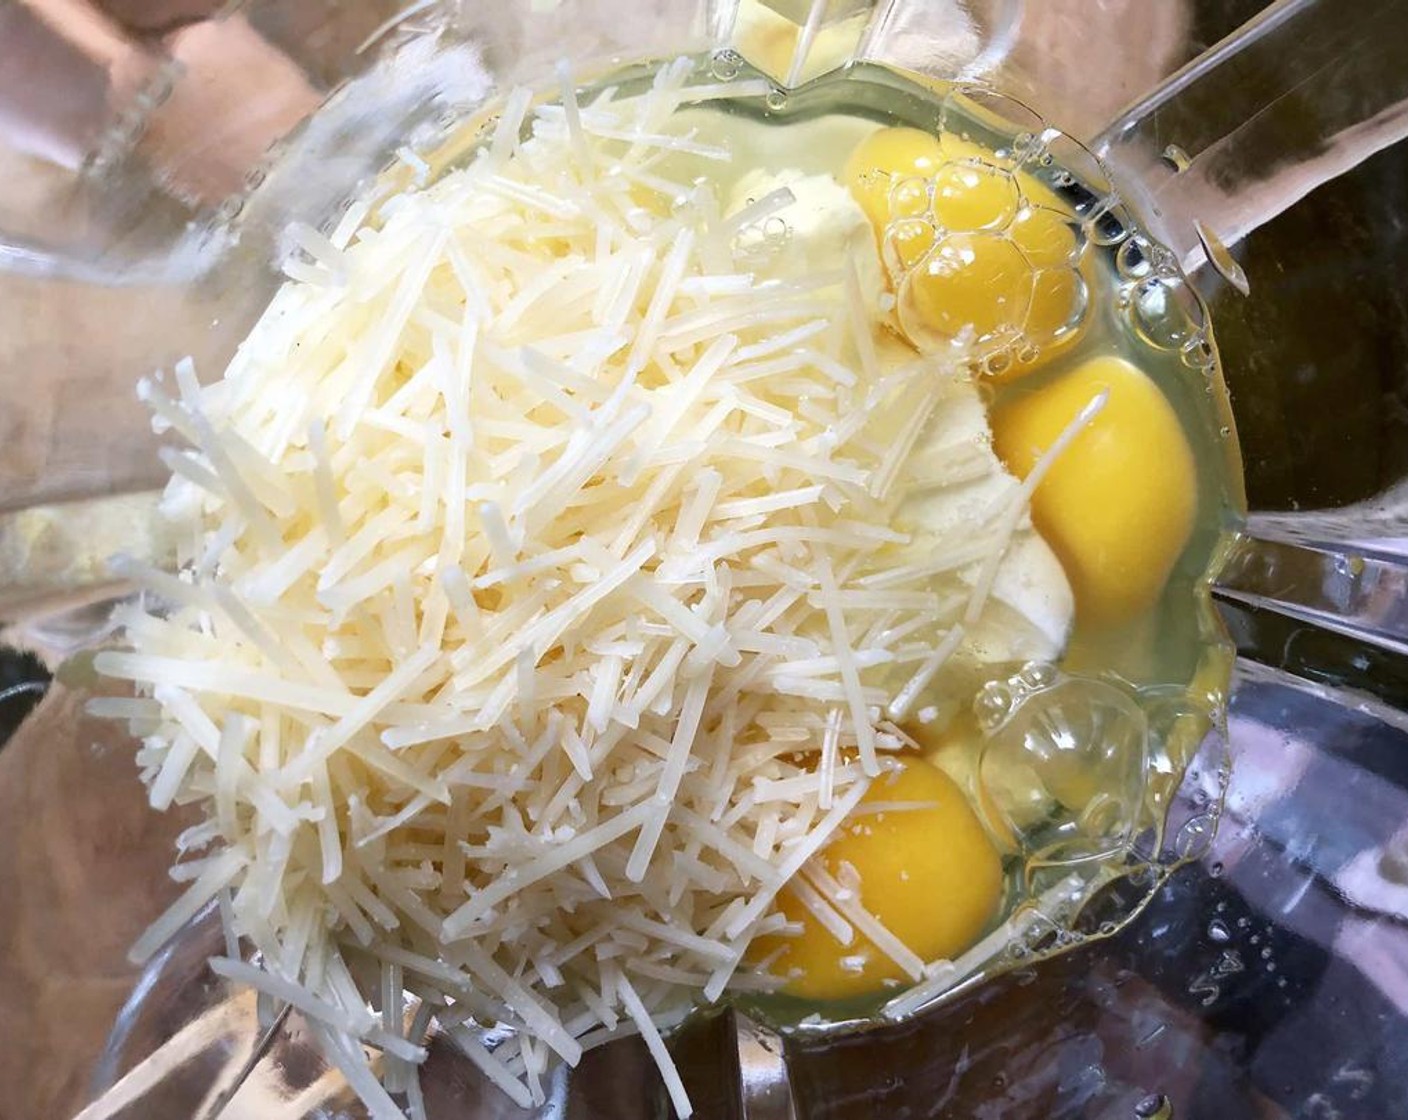 step 1 Place the softened Philadelphia Original Soft Cheese (3/4 cup), Farmhouse Eggs® Large Brown Eggs (6), Grated Parmesan Cheese (1/3 cup), and optional Granulated Erythritol (1 tsp) in the blender. Blend on low until the ingredients are completely combined.